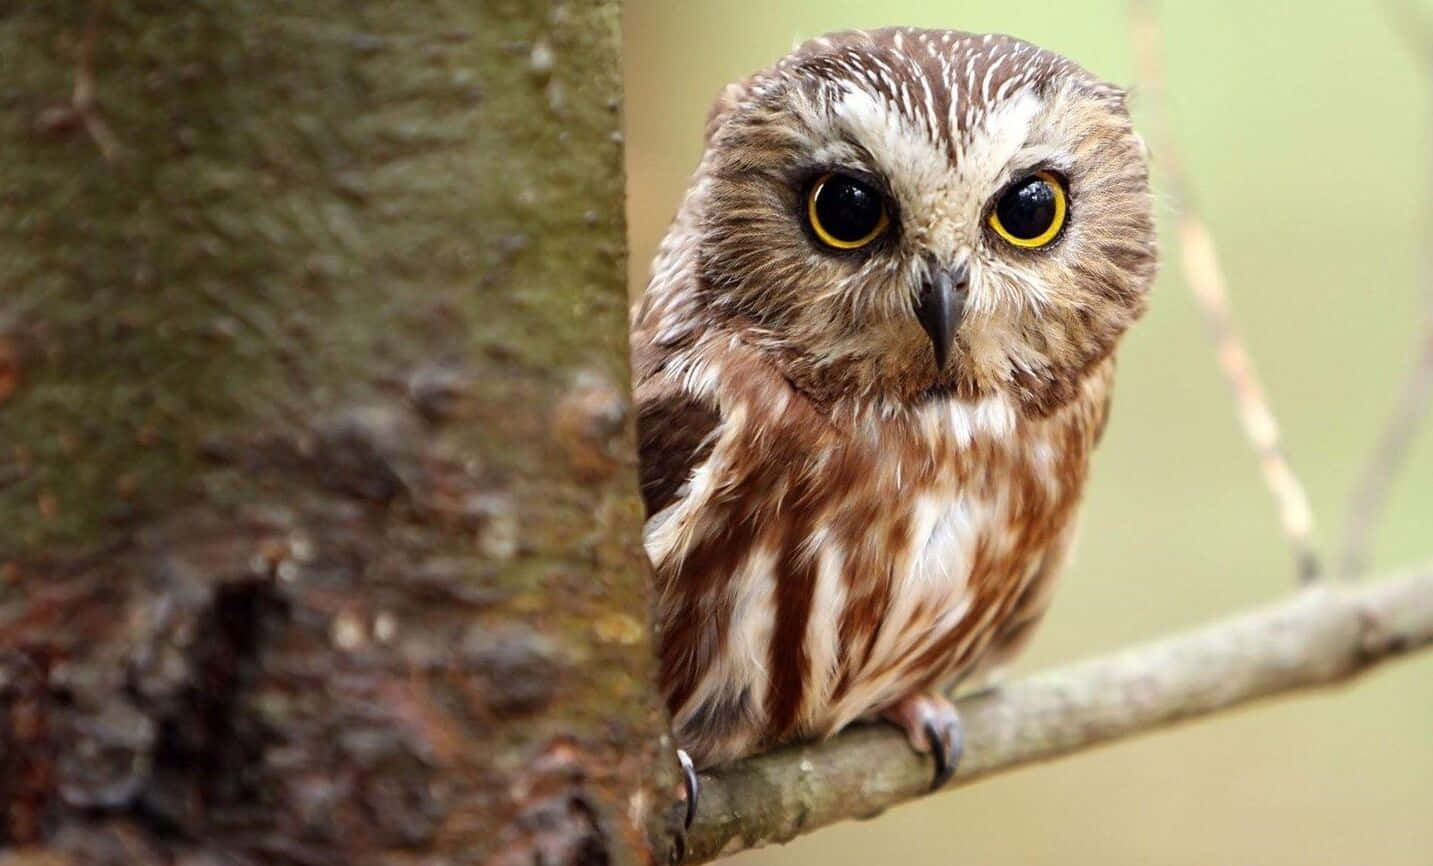 An Adorable Cute Owl on a Tree Branch